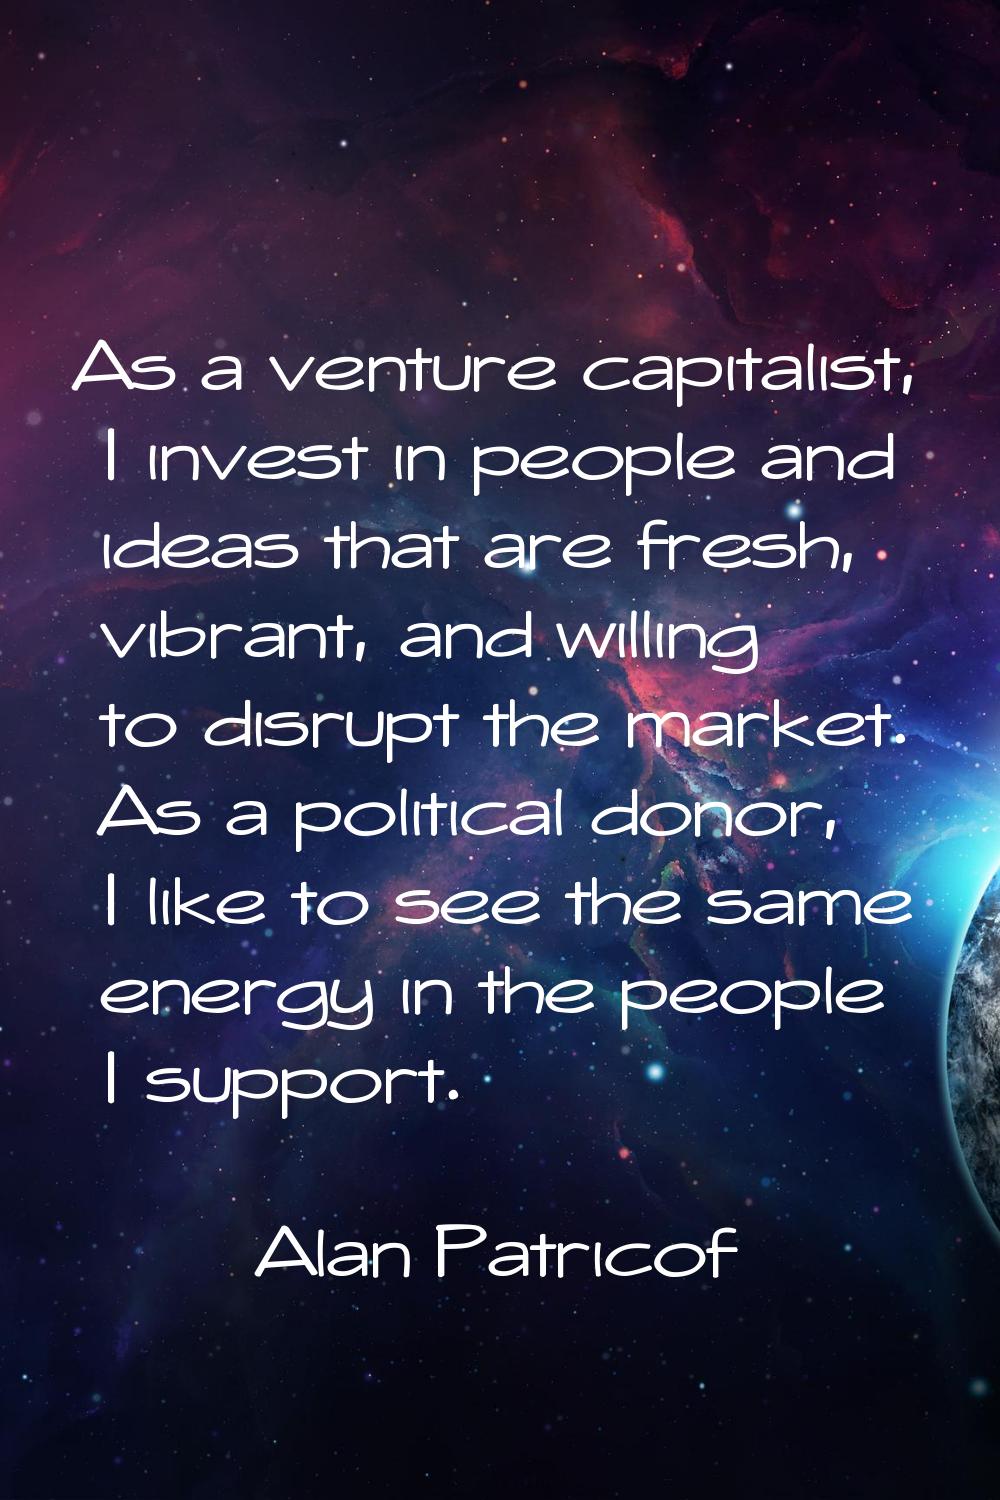 As a venture capitalist, I invest in people and ideas that are fresh, vibrant, and willing to disru